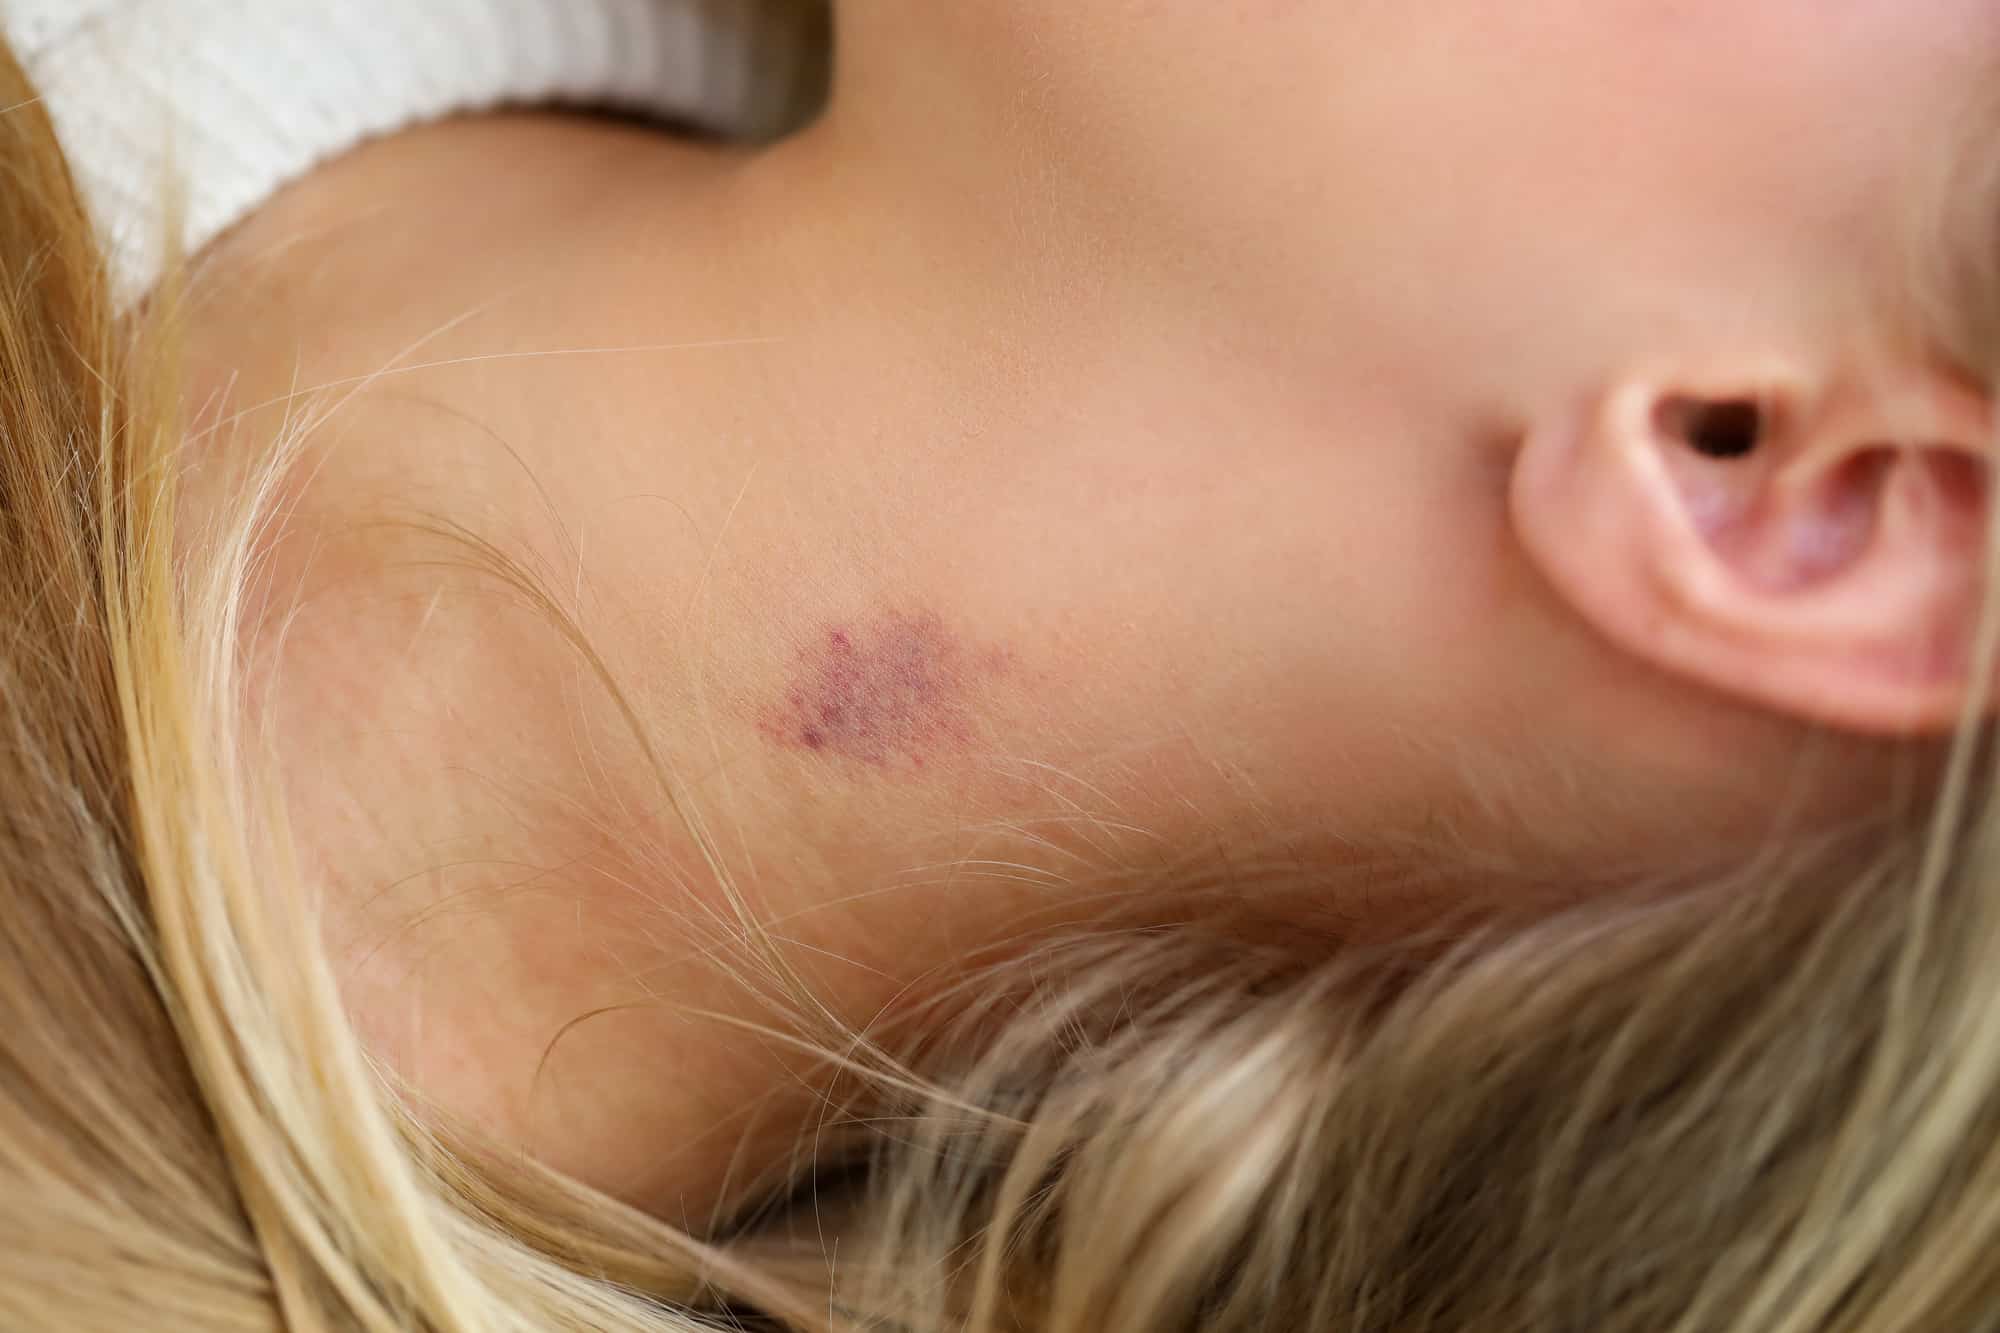 Are bad why hickies What Does